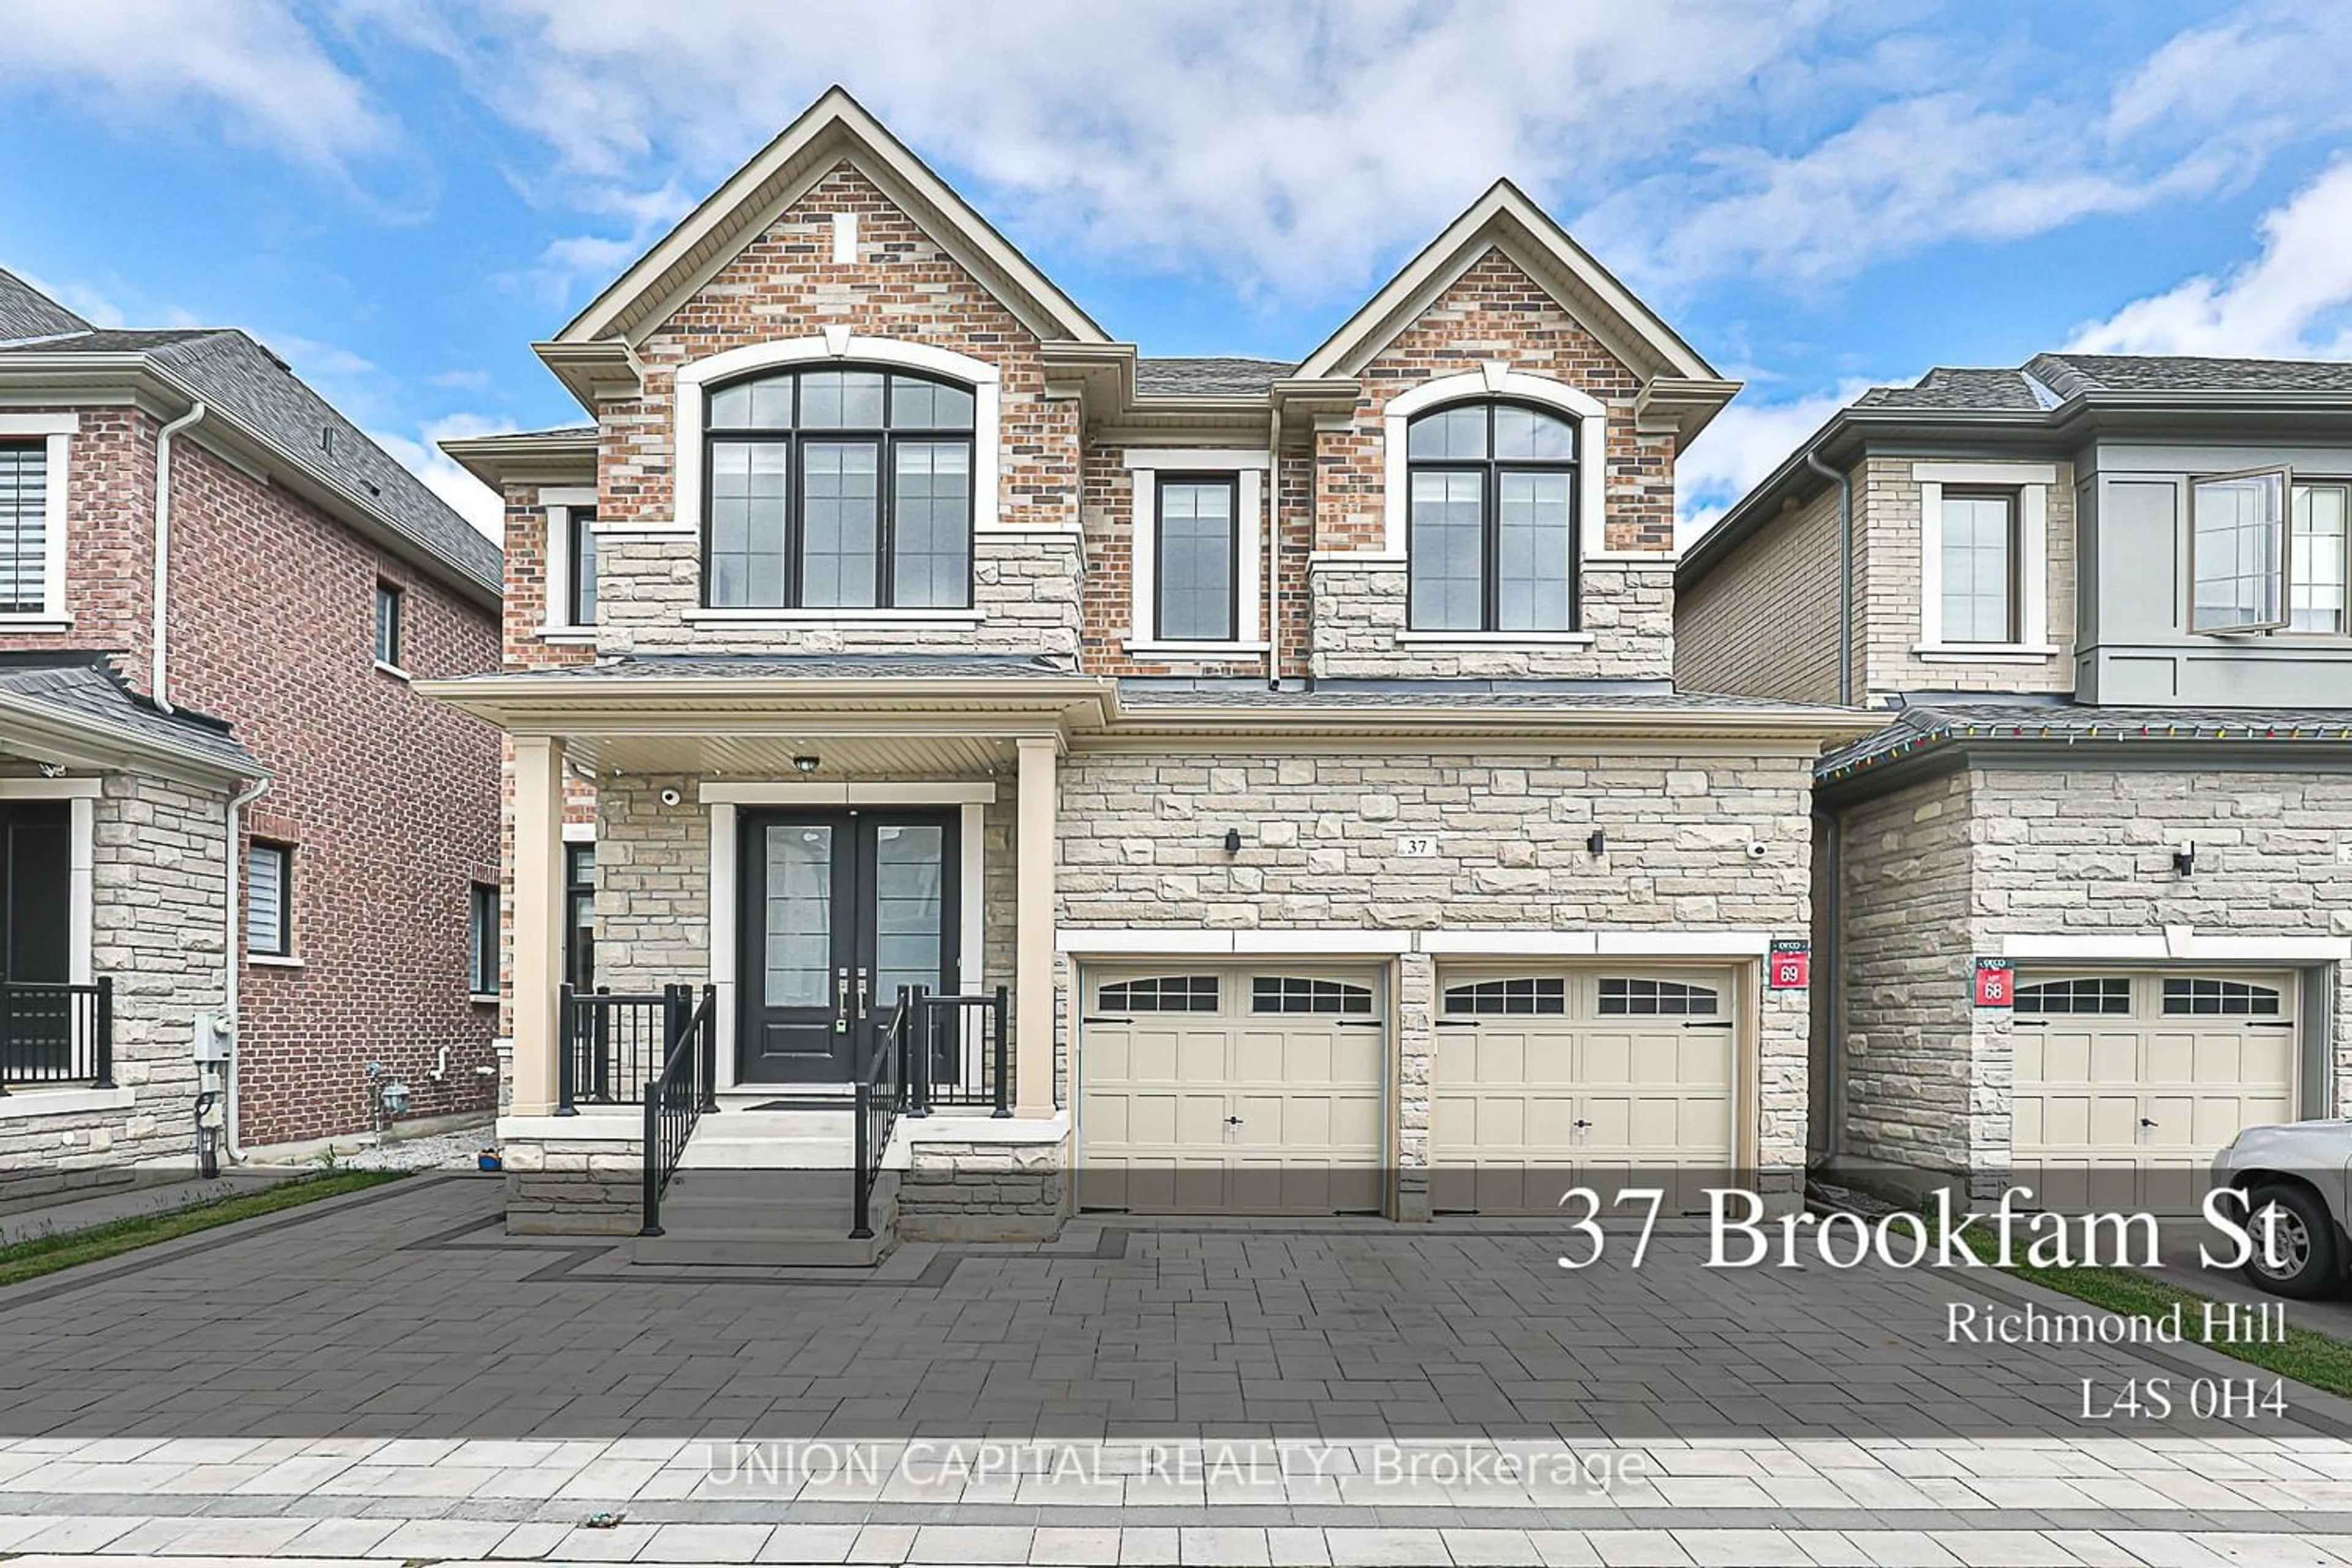 Home with brick exterior material for 37 Brookfam St, Richmond Hill Ontario L4S 0H4